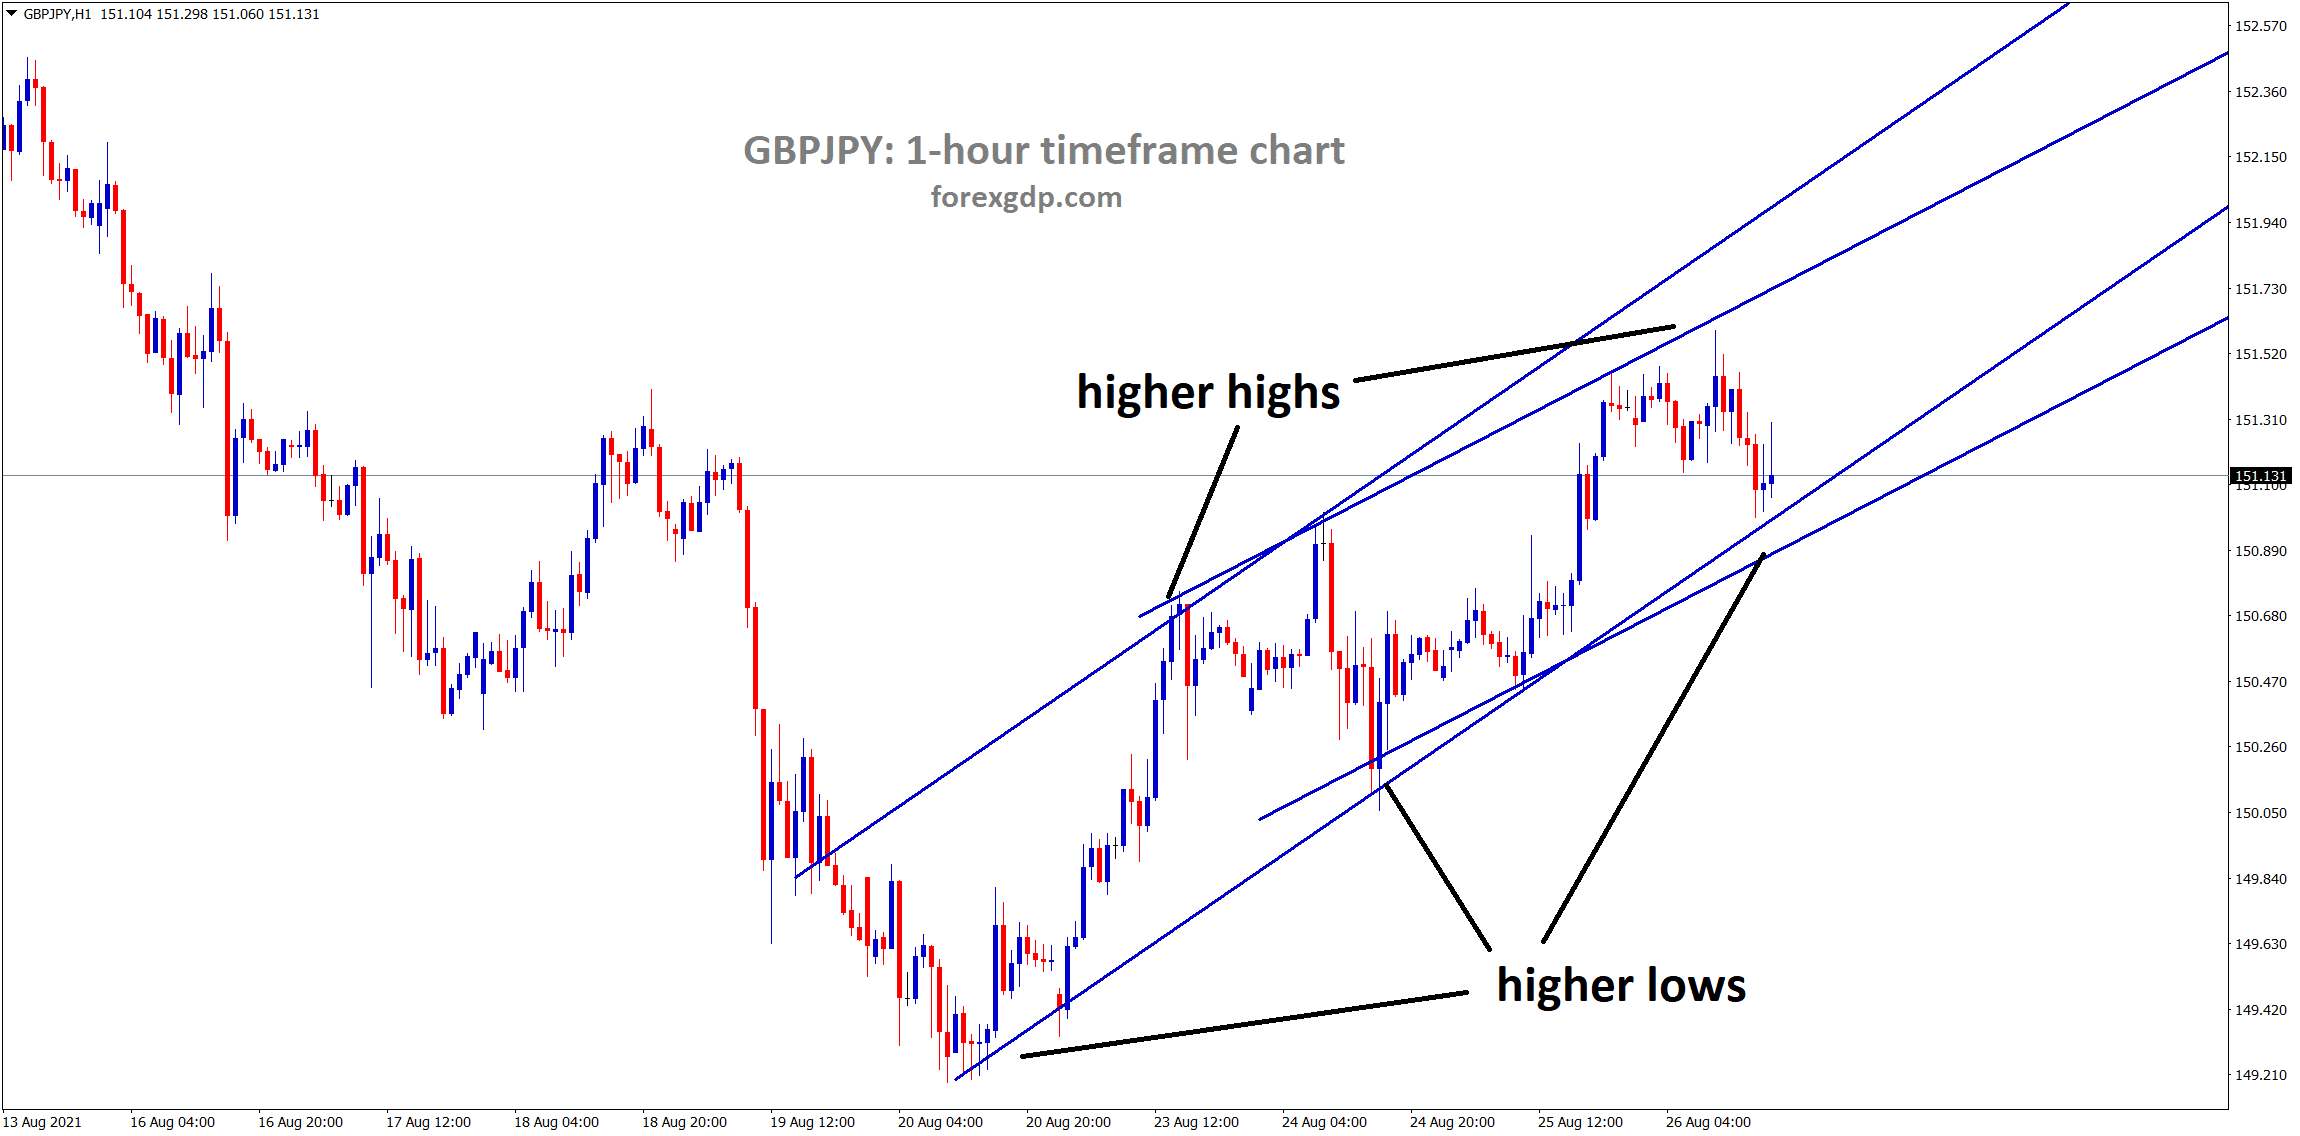 GBPJPY is moving in an uptrend line between the channel chart pattern